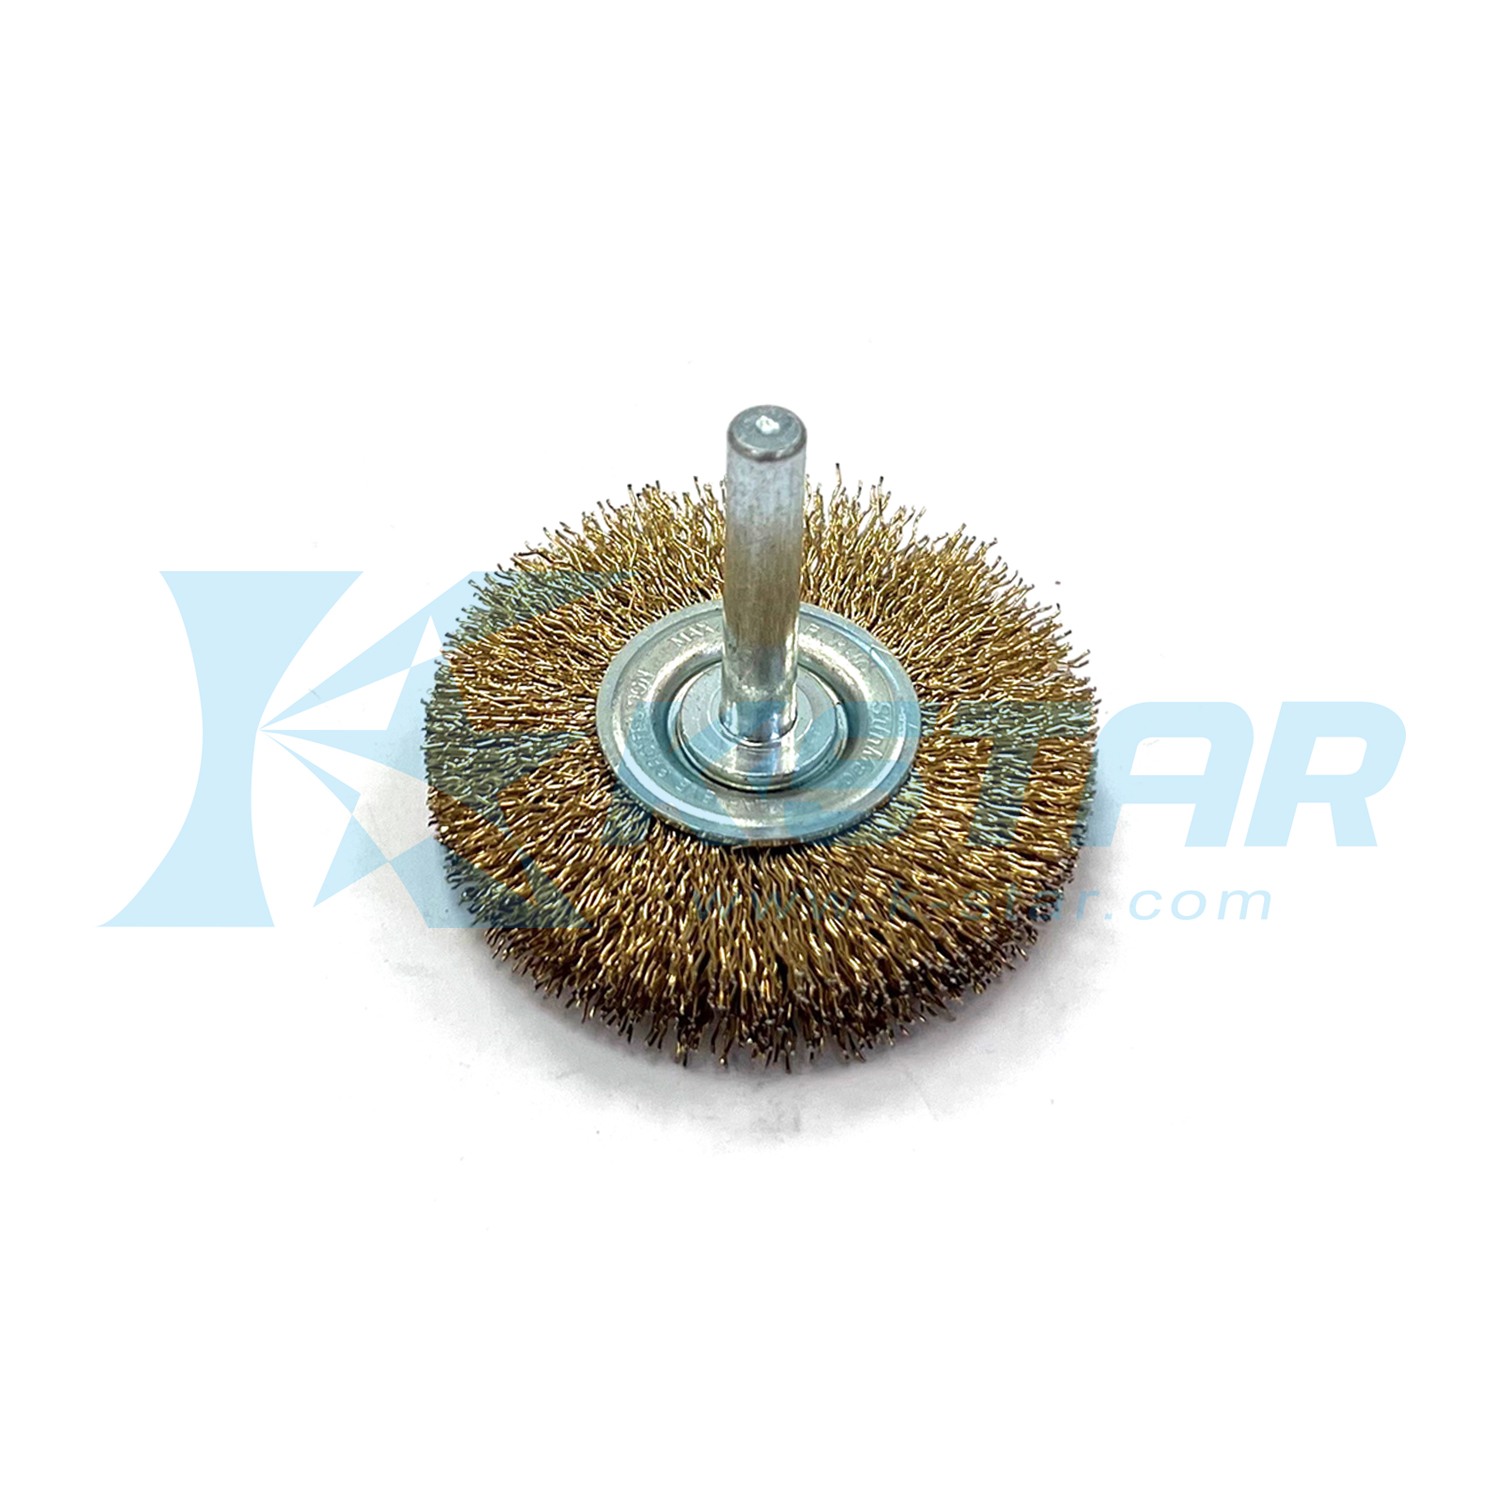 BRASS COATED WIRE WHEEL BRUSHES WITH SHANK Φ2", SHANK: 6MM